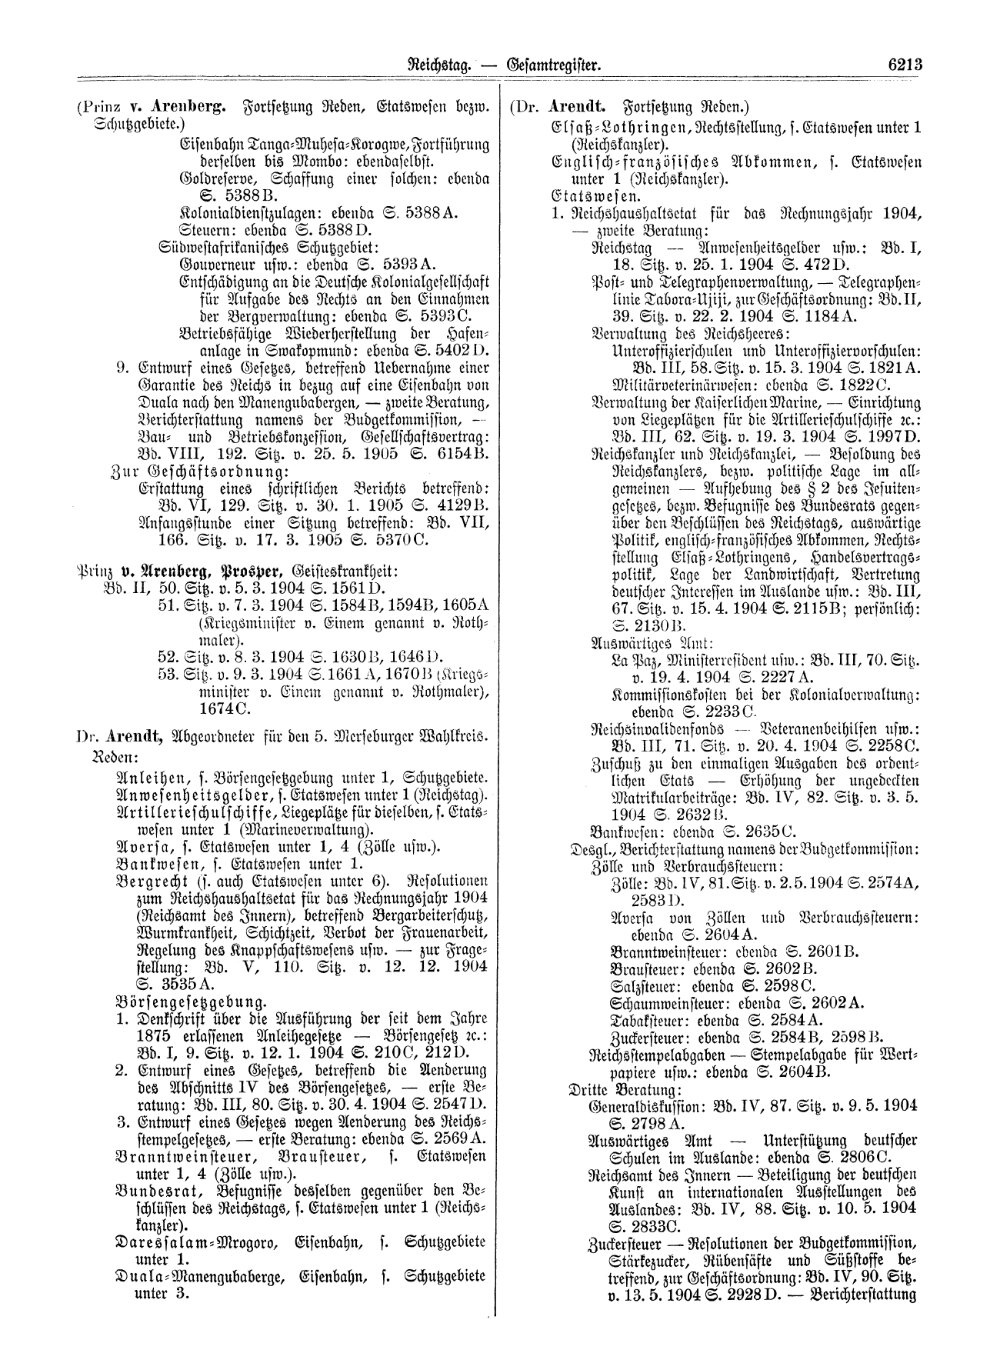 Scan of page 6213